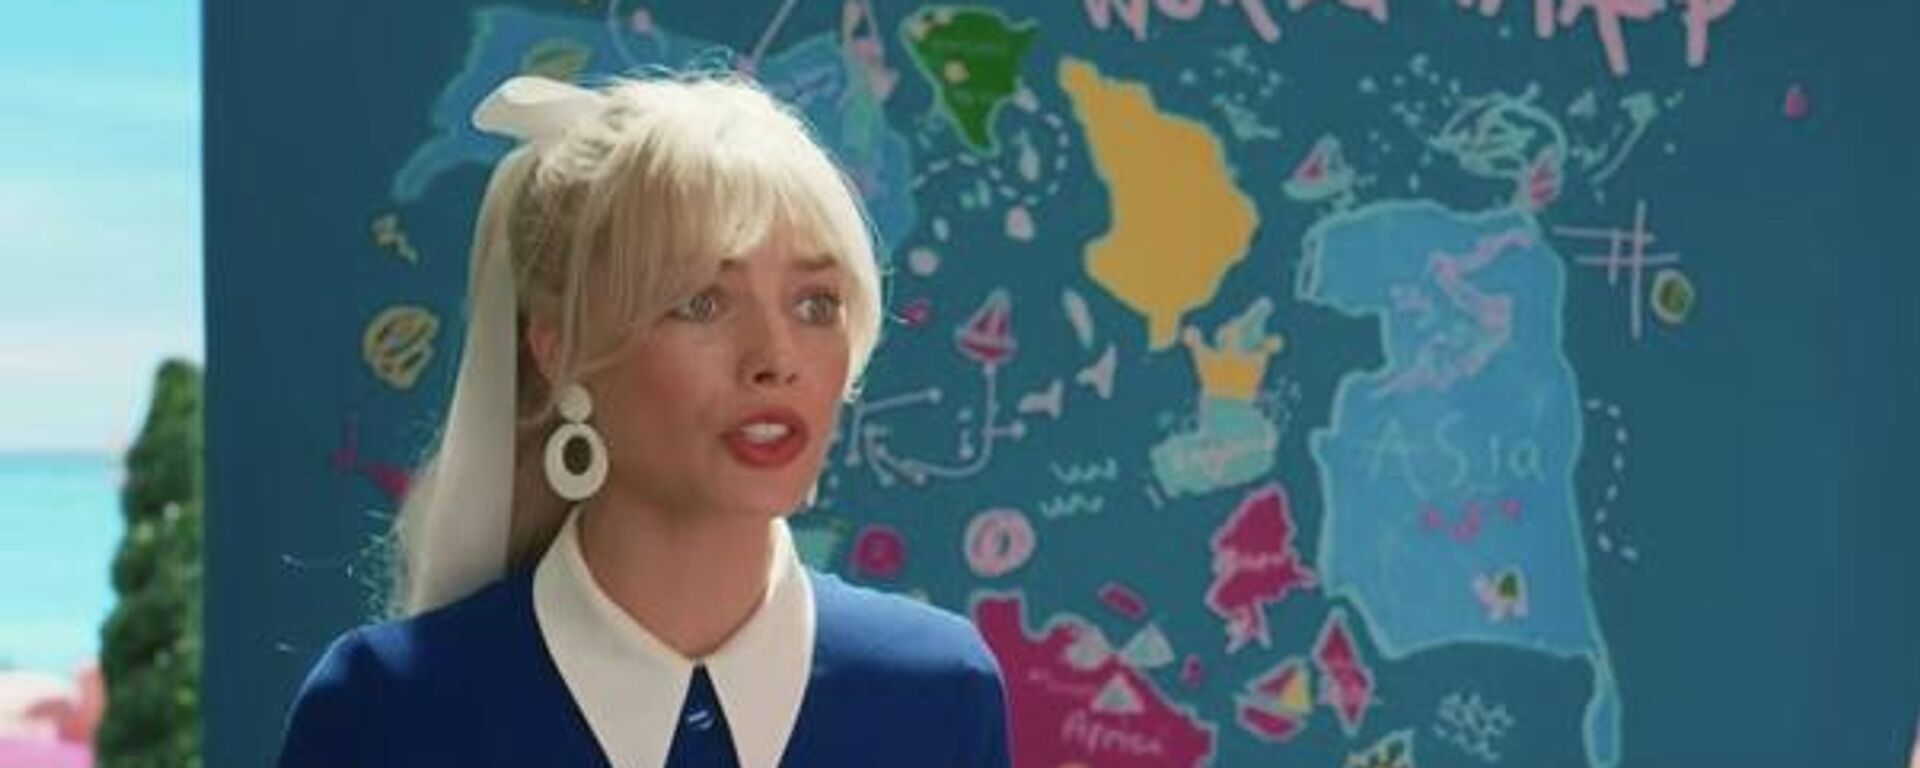 A screenshot from the trailer for the 'Barbie' movie directed by Greta Gerwig - Sputnik India, 1920, 12.07.2023